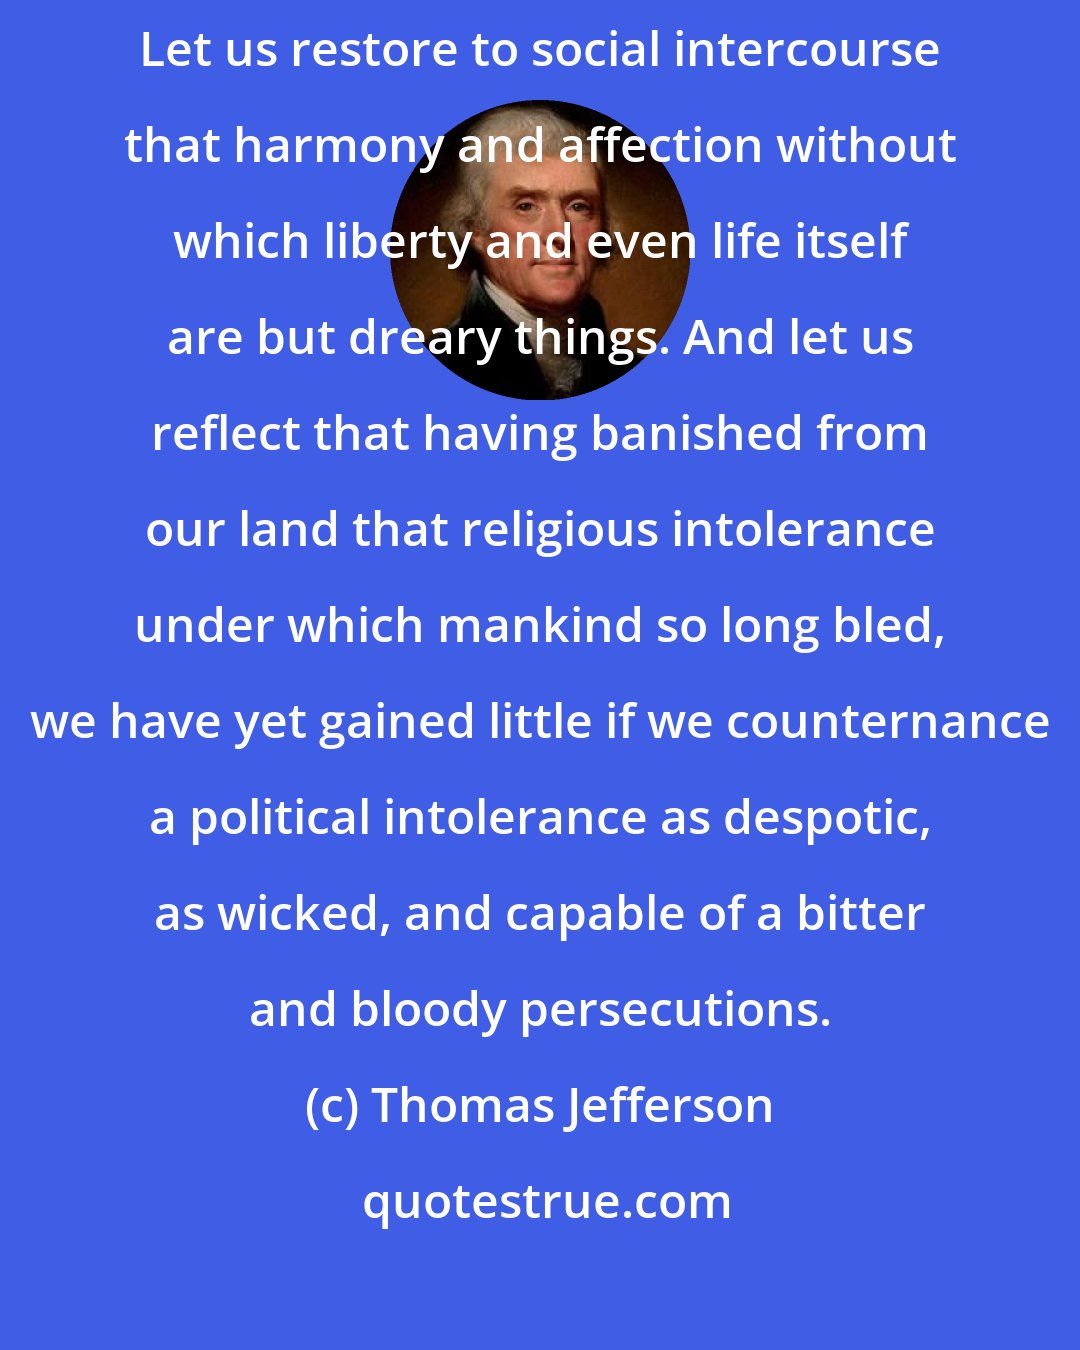 Thomas Jefferson: Let us, then, fellow citizens, unite with one heart and one mind. Let us restore to social intercourse that harmony and affection without which liberty and even life itself are but dreary things. And let us reflect that having banished from our land that religious intolerance under which mankind so long bled, we have yet gained little if we counternance a political intolerance as despotic, as wicked, and capable of a bitter and bloody persecutions.